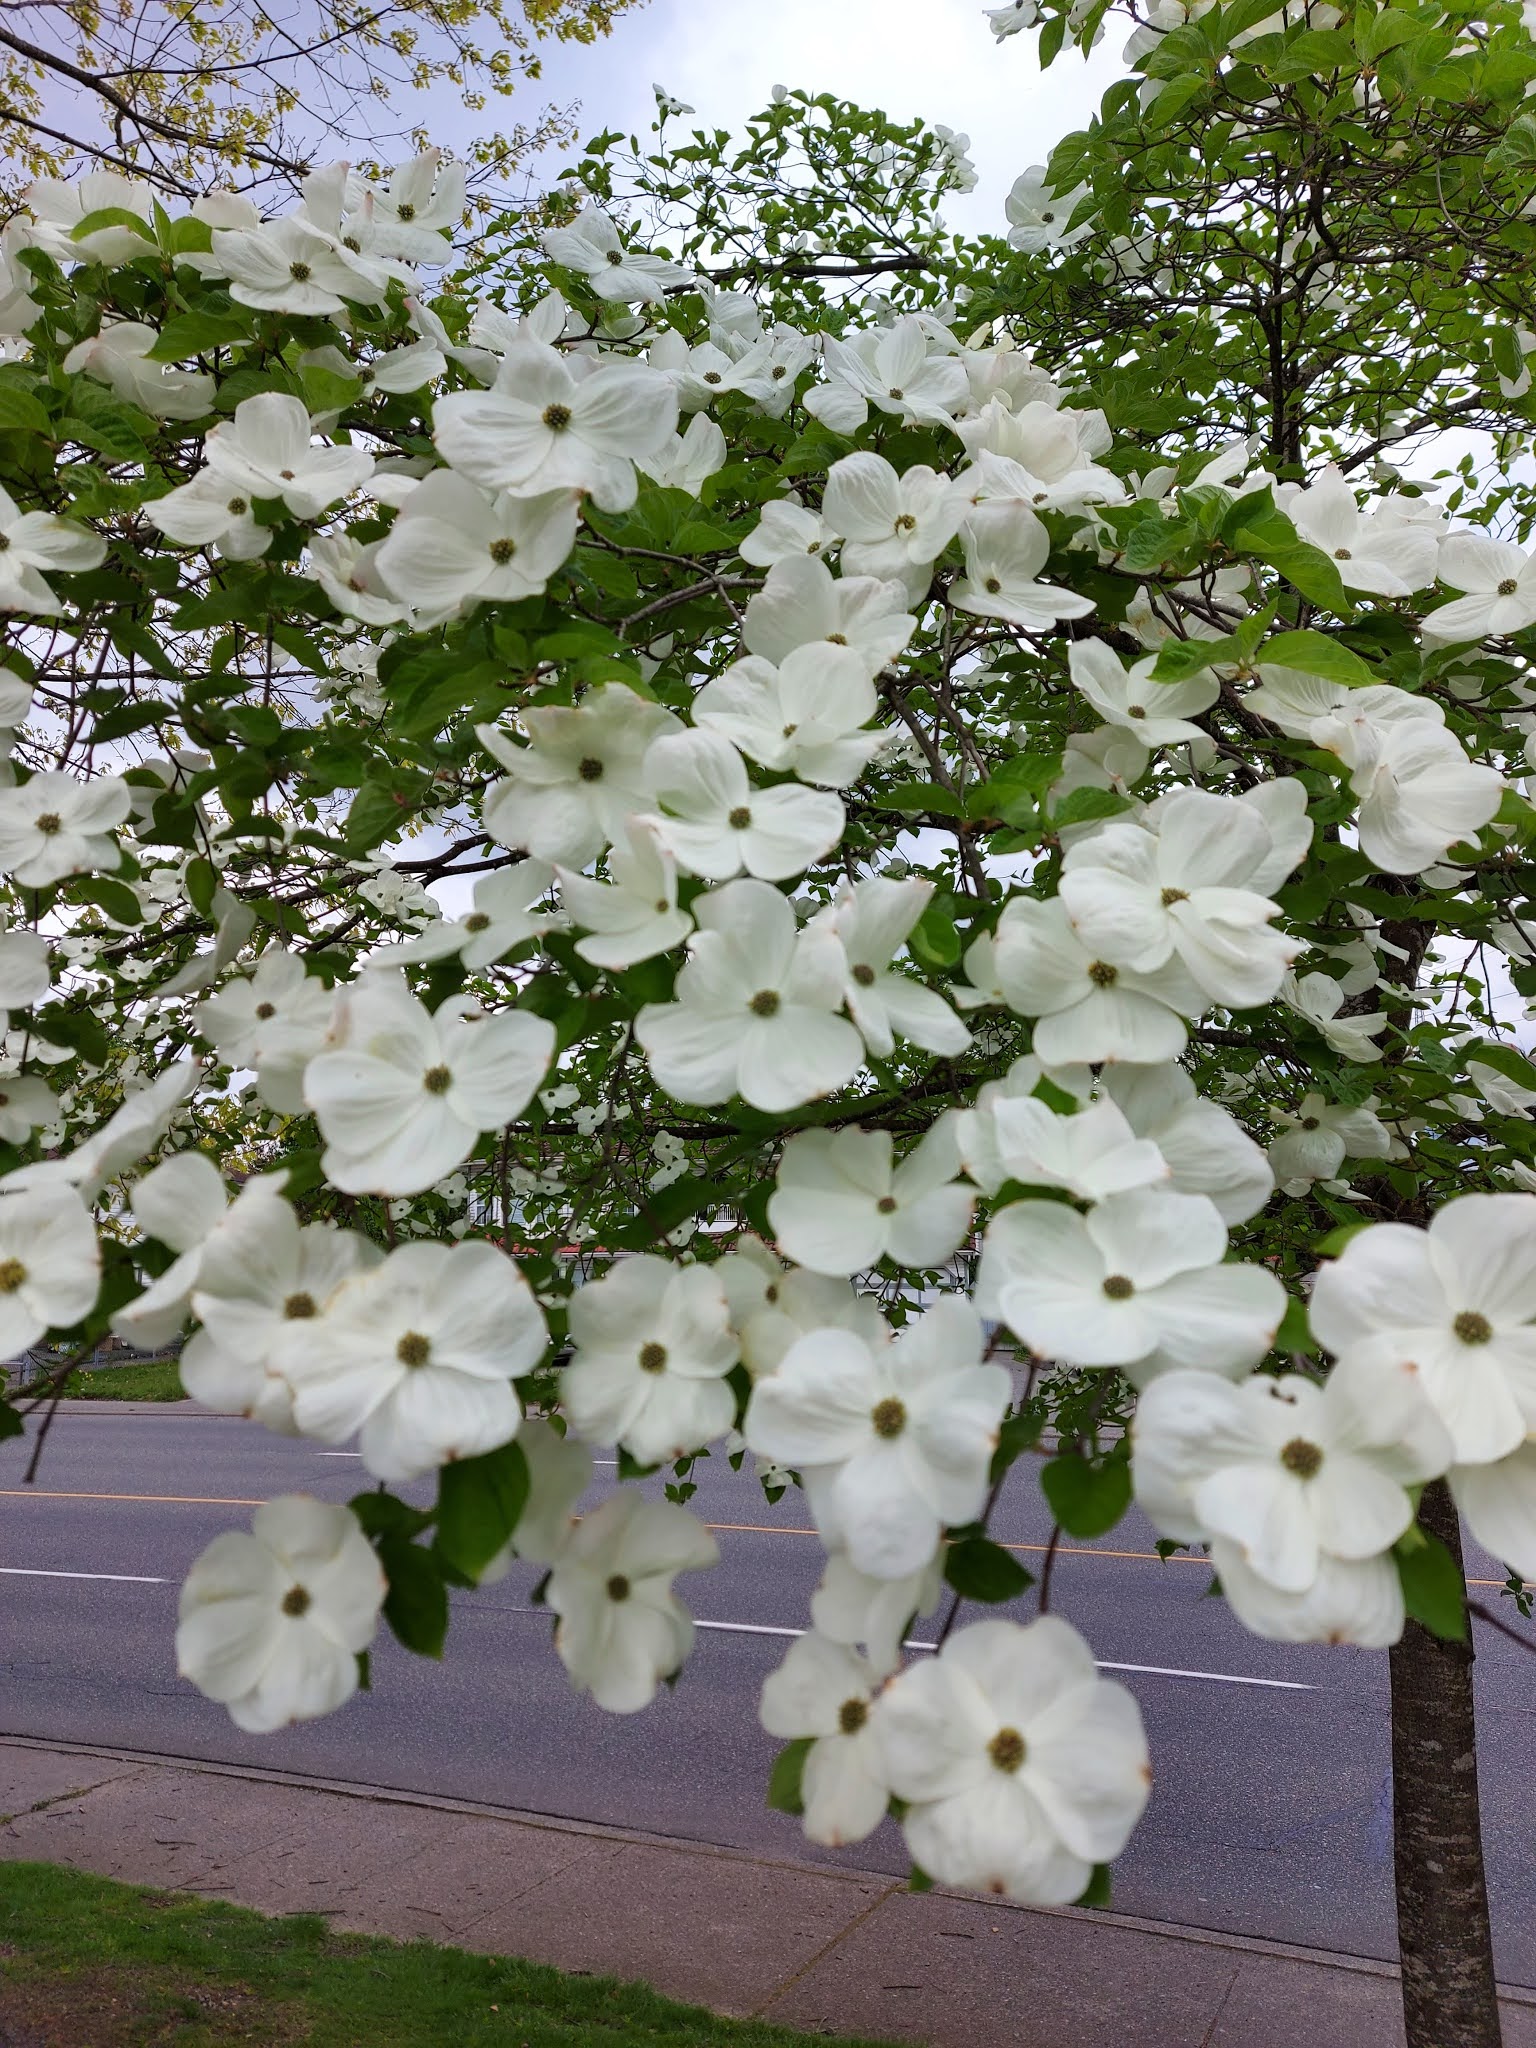 A tree with white flowers